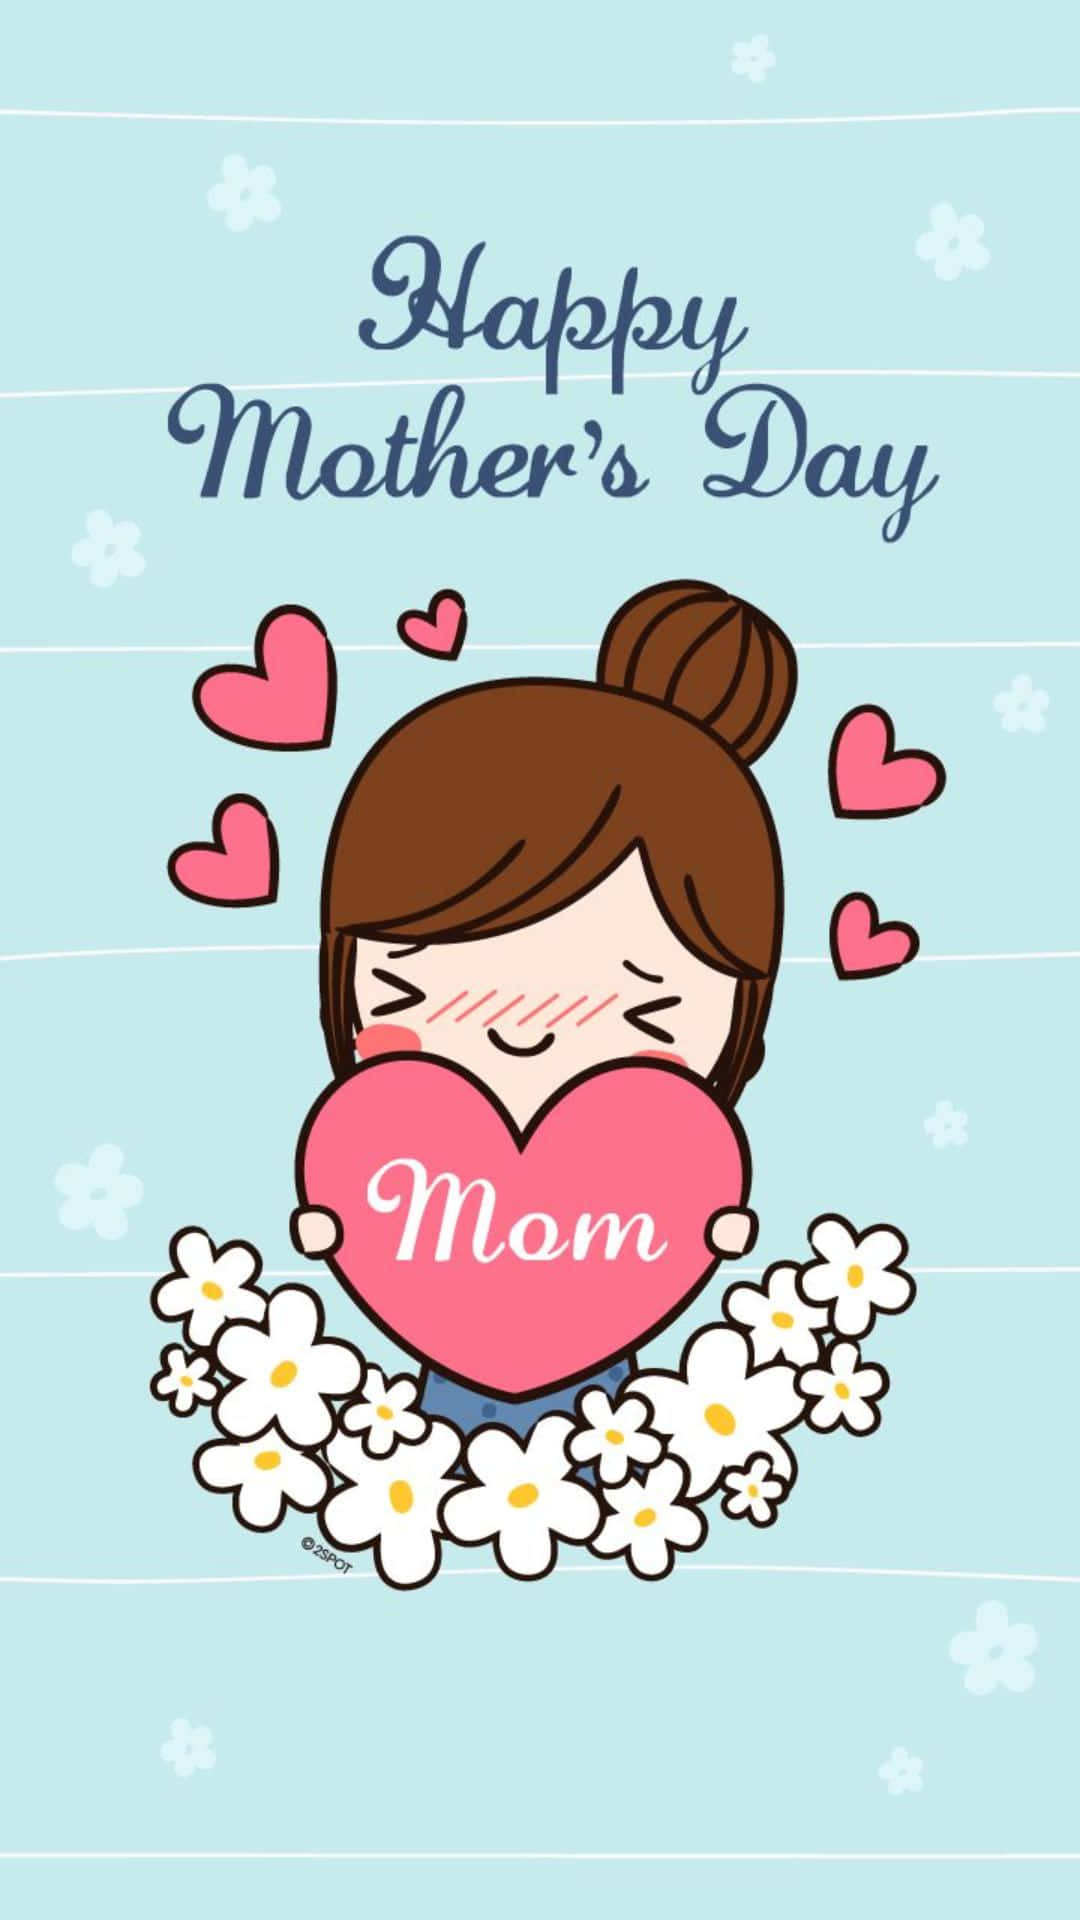 “Happy Mother's Day! Sending all the love from afar!” Wallpaper